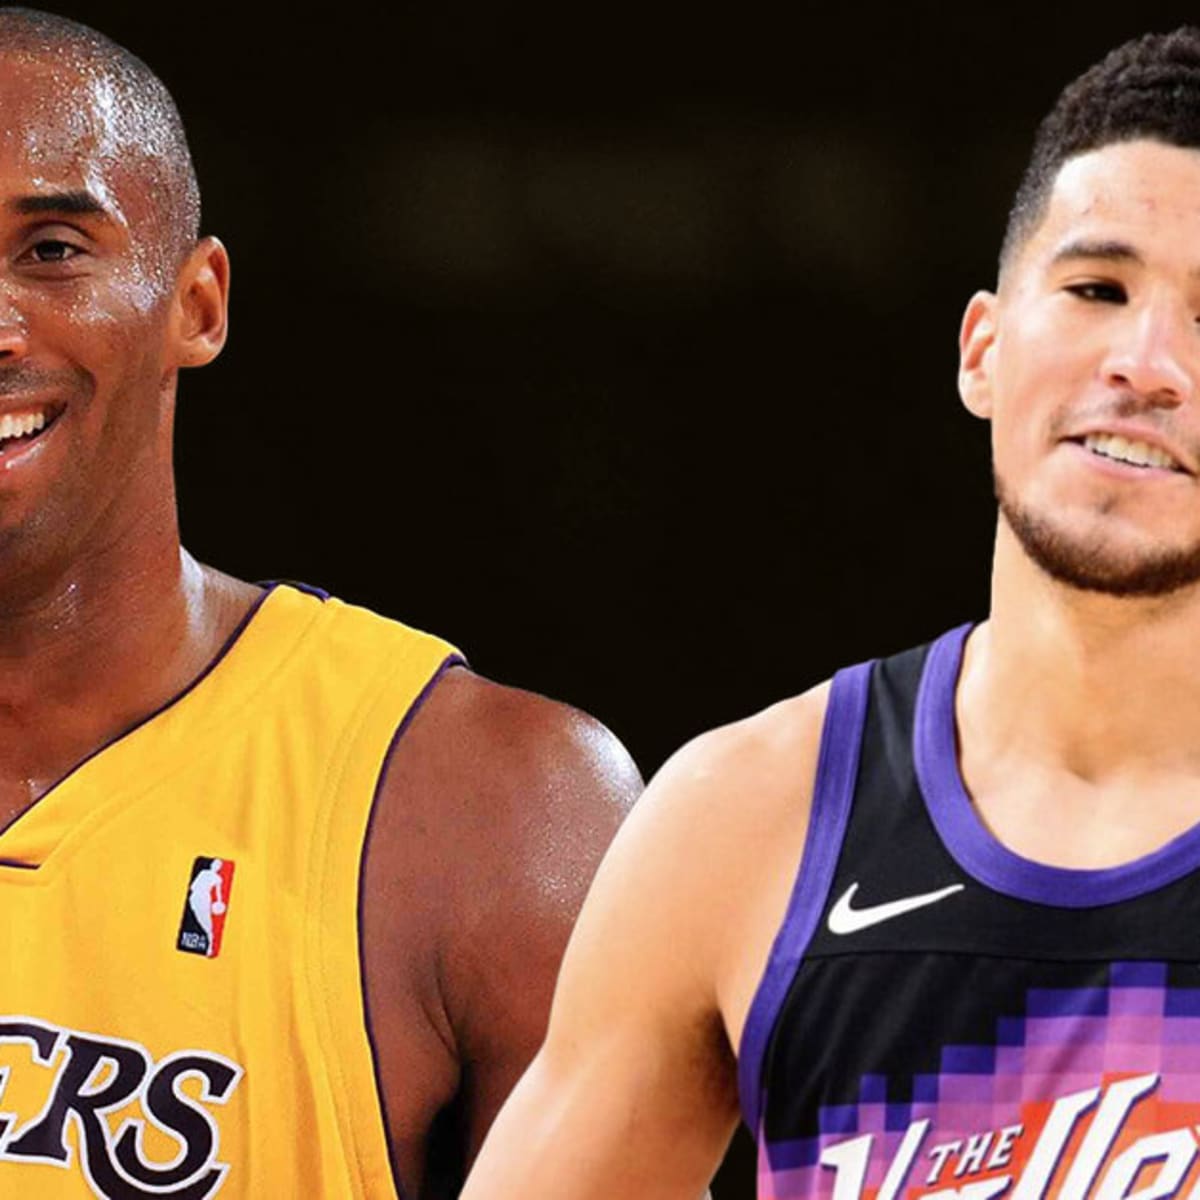 In 2016, Kobe Bryant told Devin Booker to “Be Legendary.” Now, he